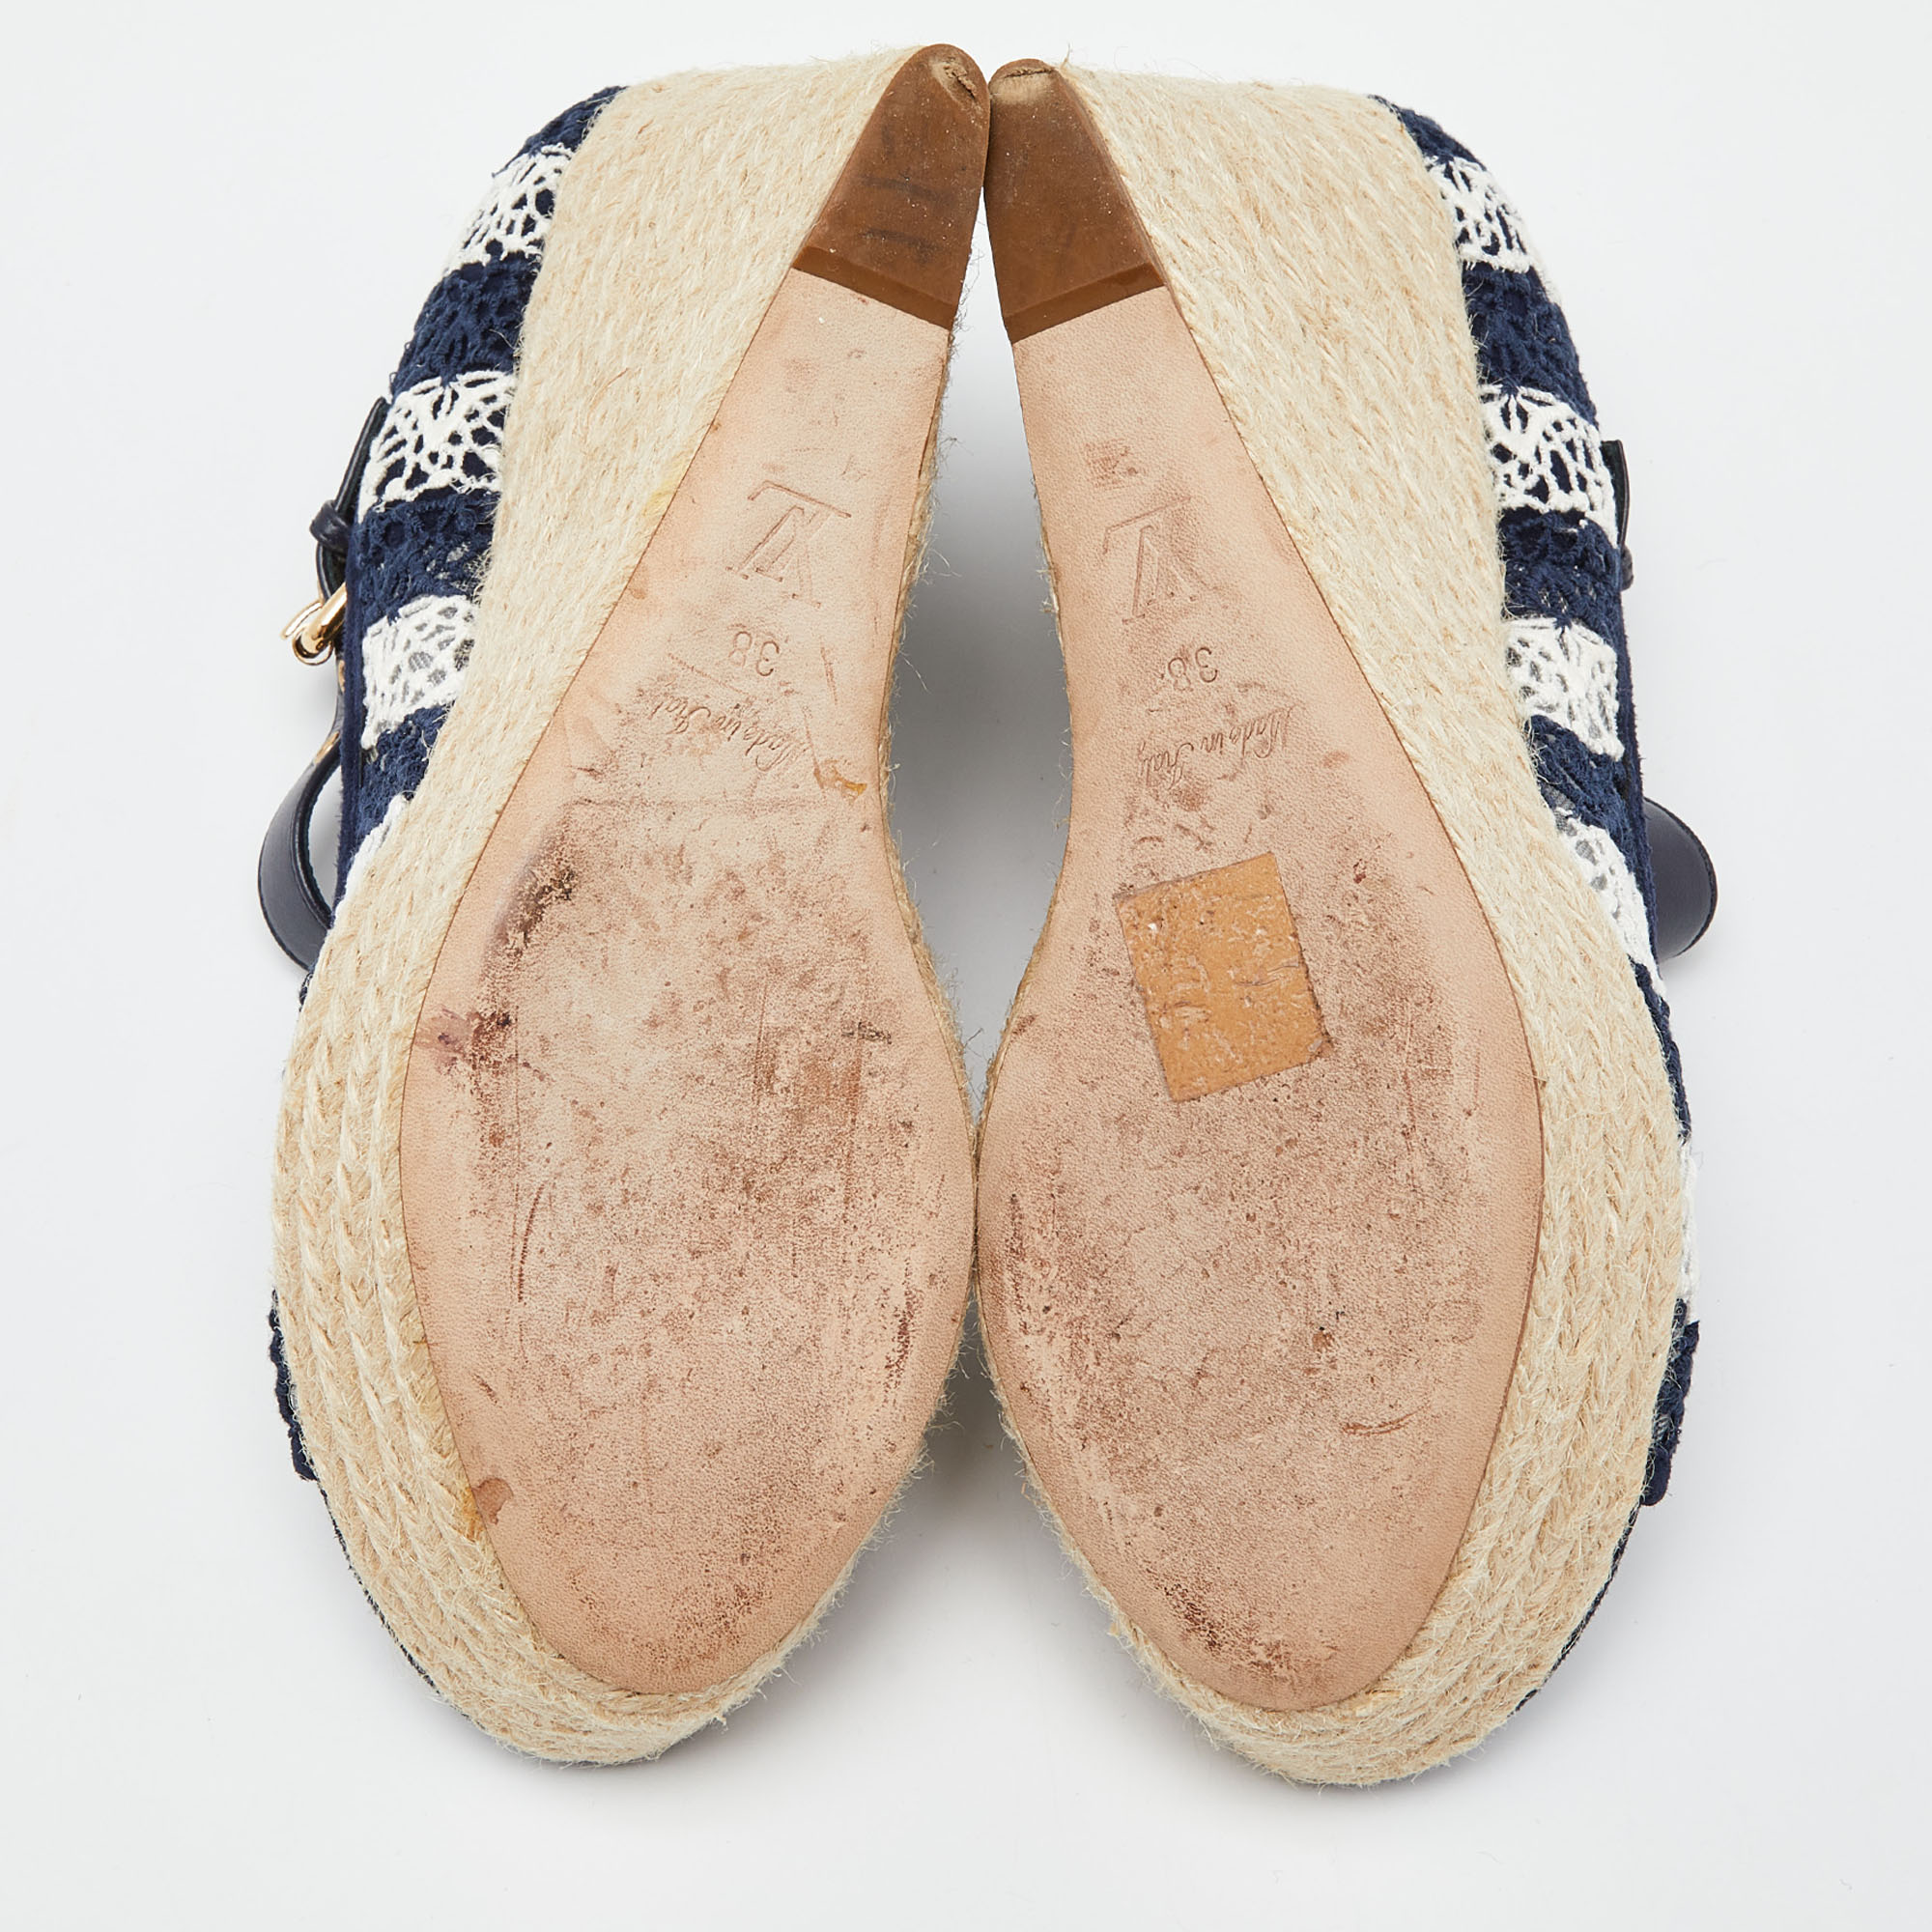 Louis Vuitton Blue/White Fabric, Suede And Mesh Open Toe Wedge Espadrille Sandals Size 38